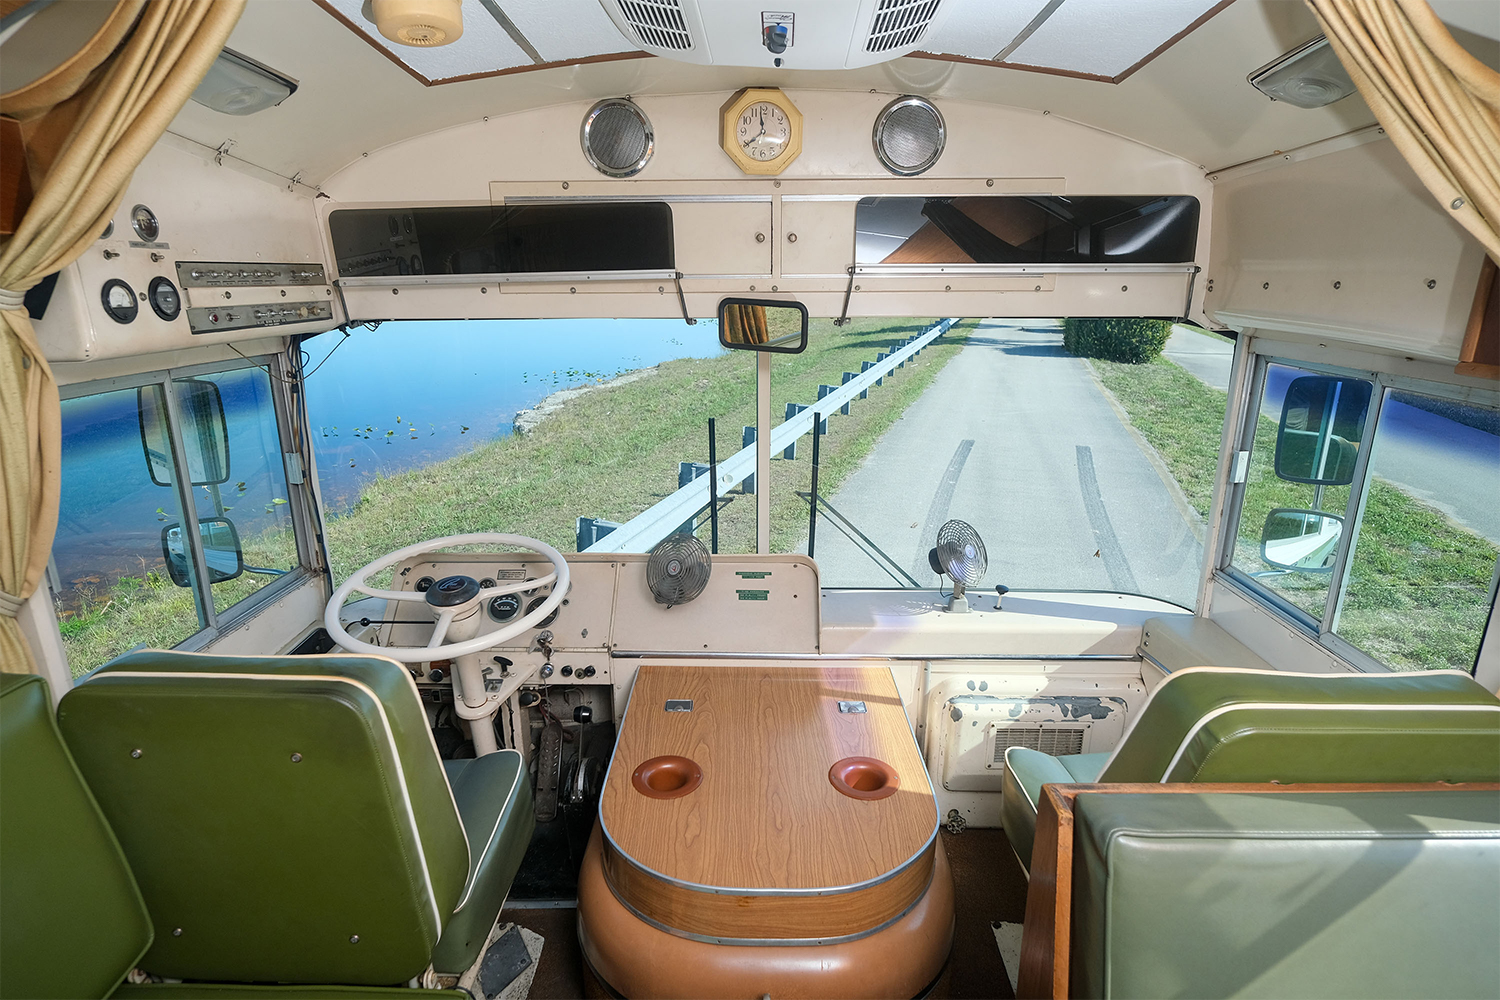 The driver's seat in a 1969 Blue Bird Wanderlodge RV